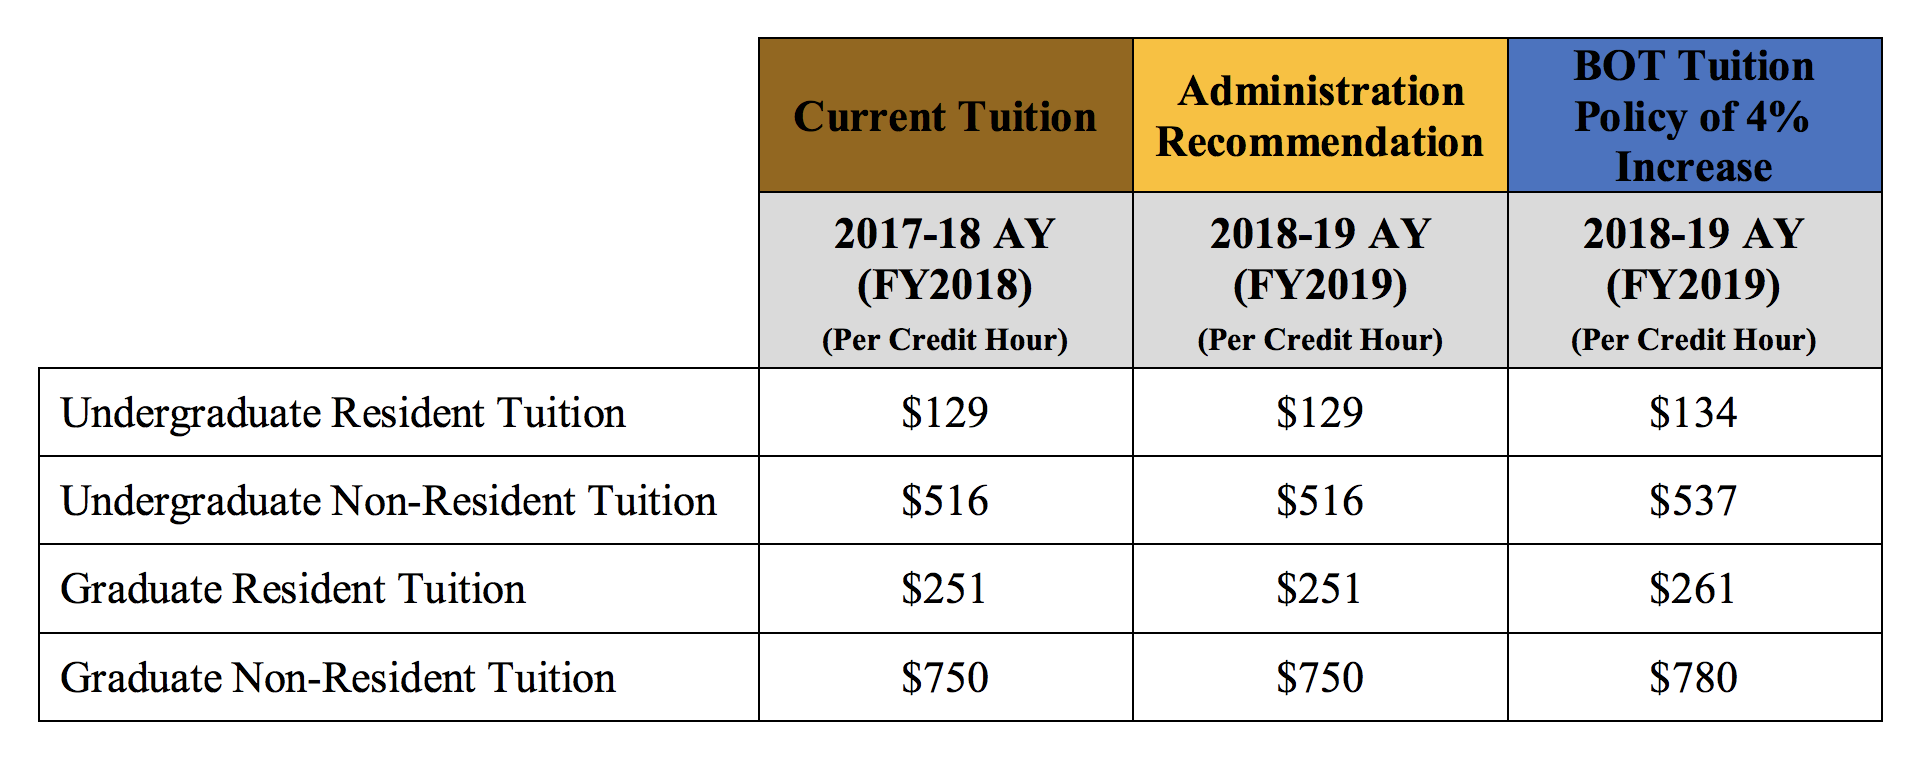 UW Board Increases Tuition And Fees, Considers OutOfState Decrease